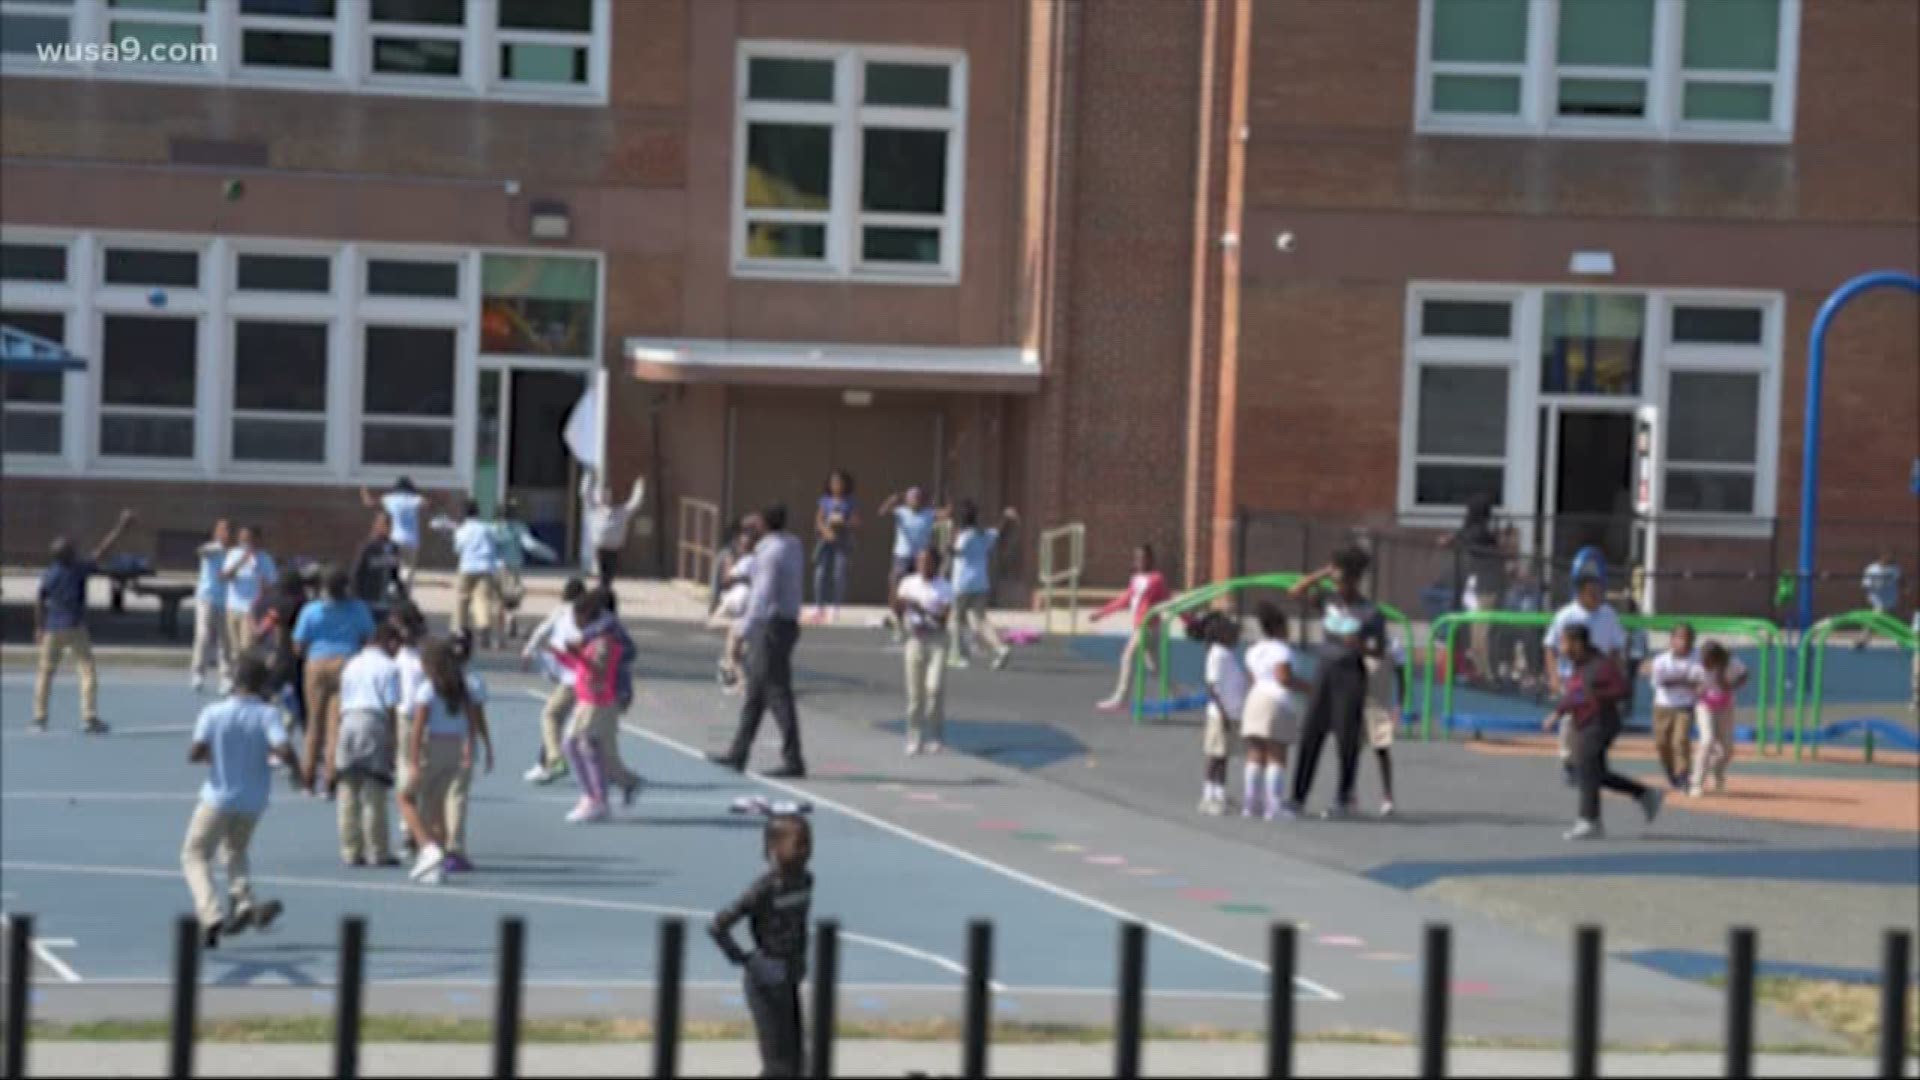 The community meeting Wednesday night comes after WUSA9 broke news of high lead levels in 17 DC playgrounds.